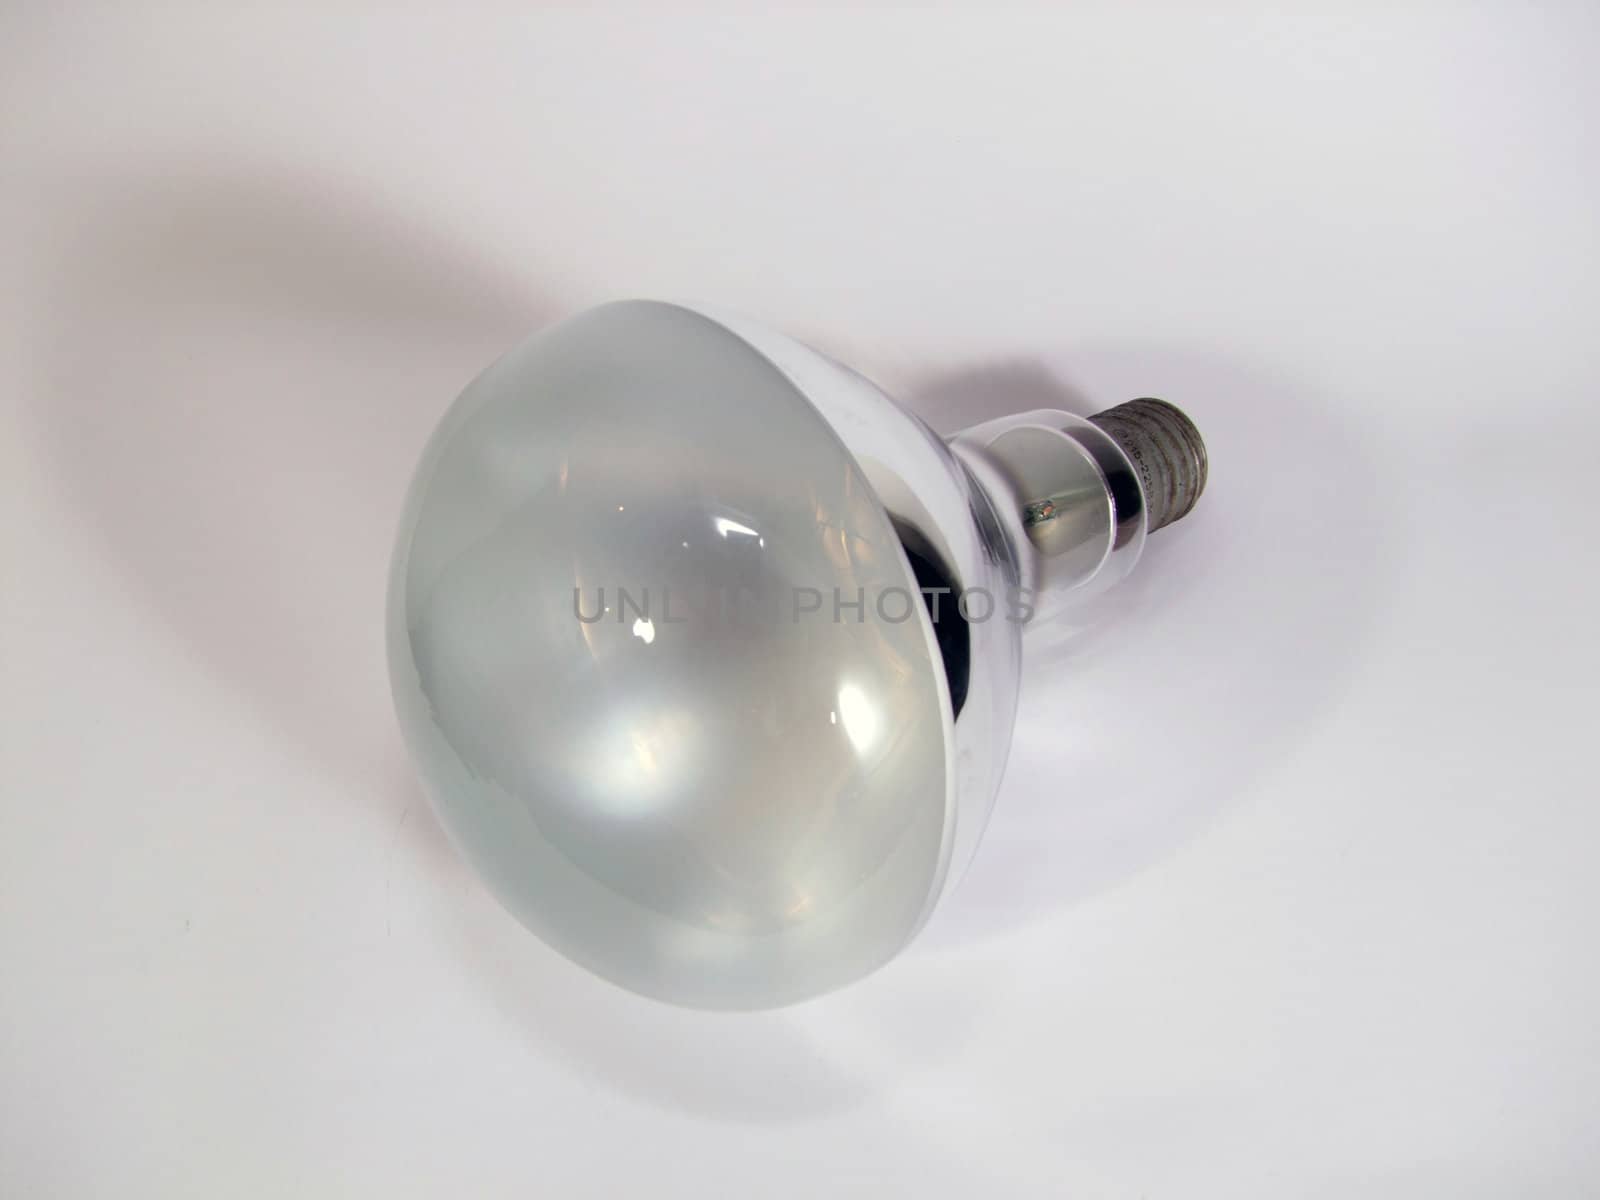 matt glass lamps are used in a photo